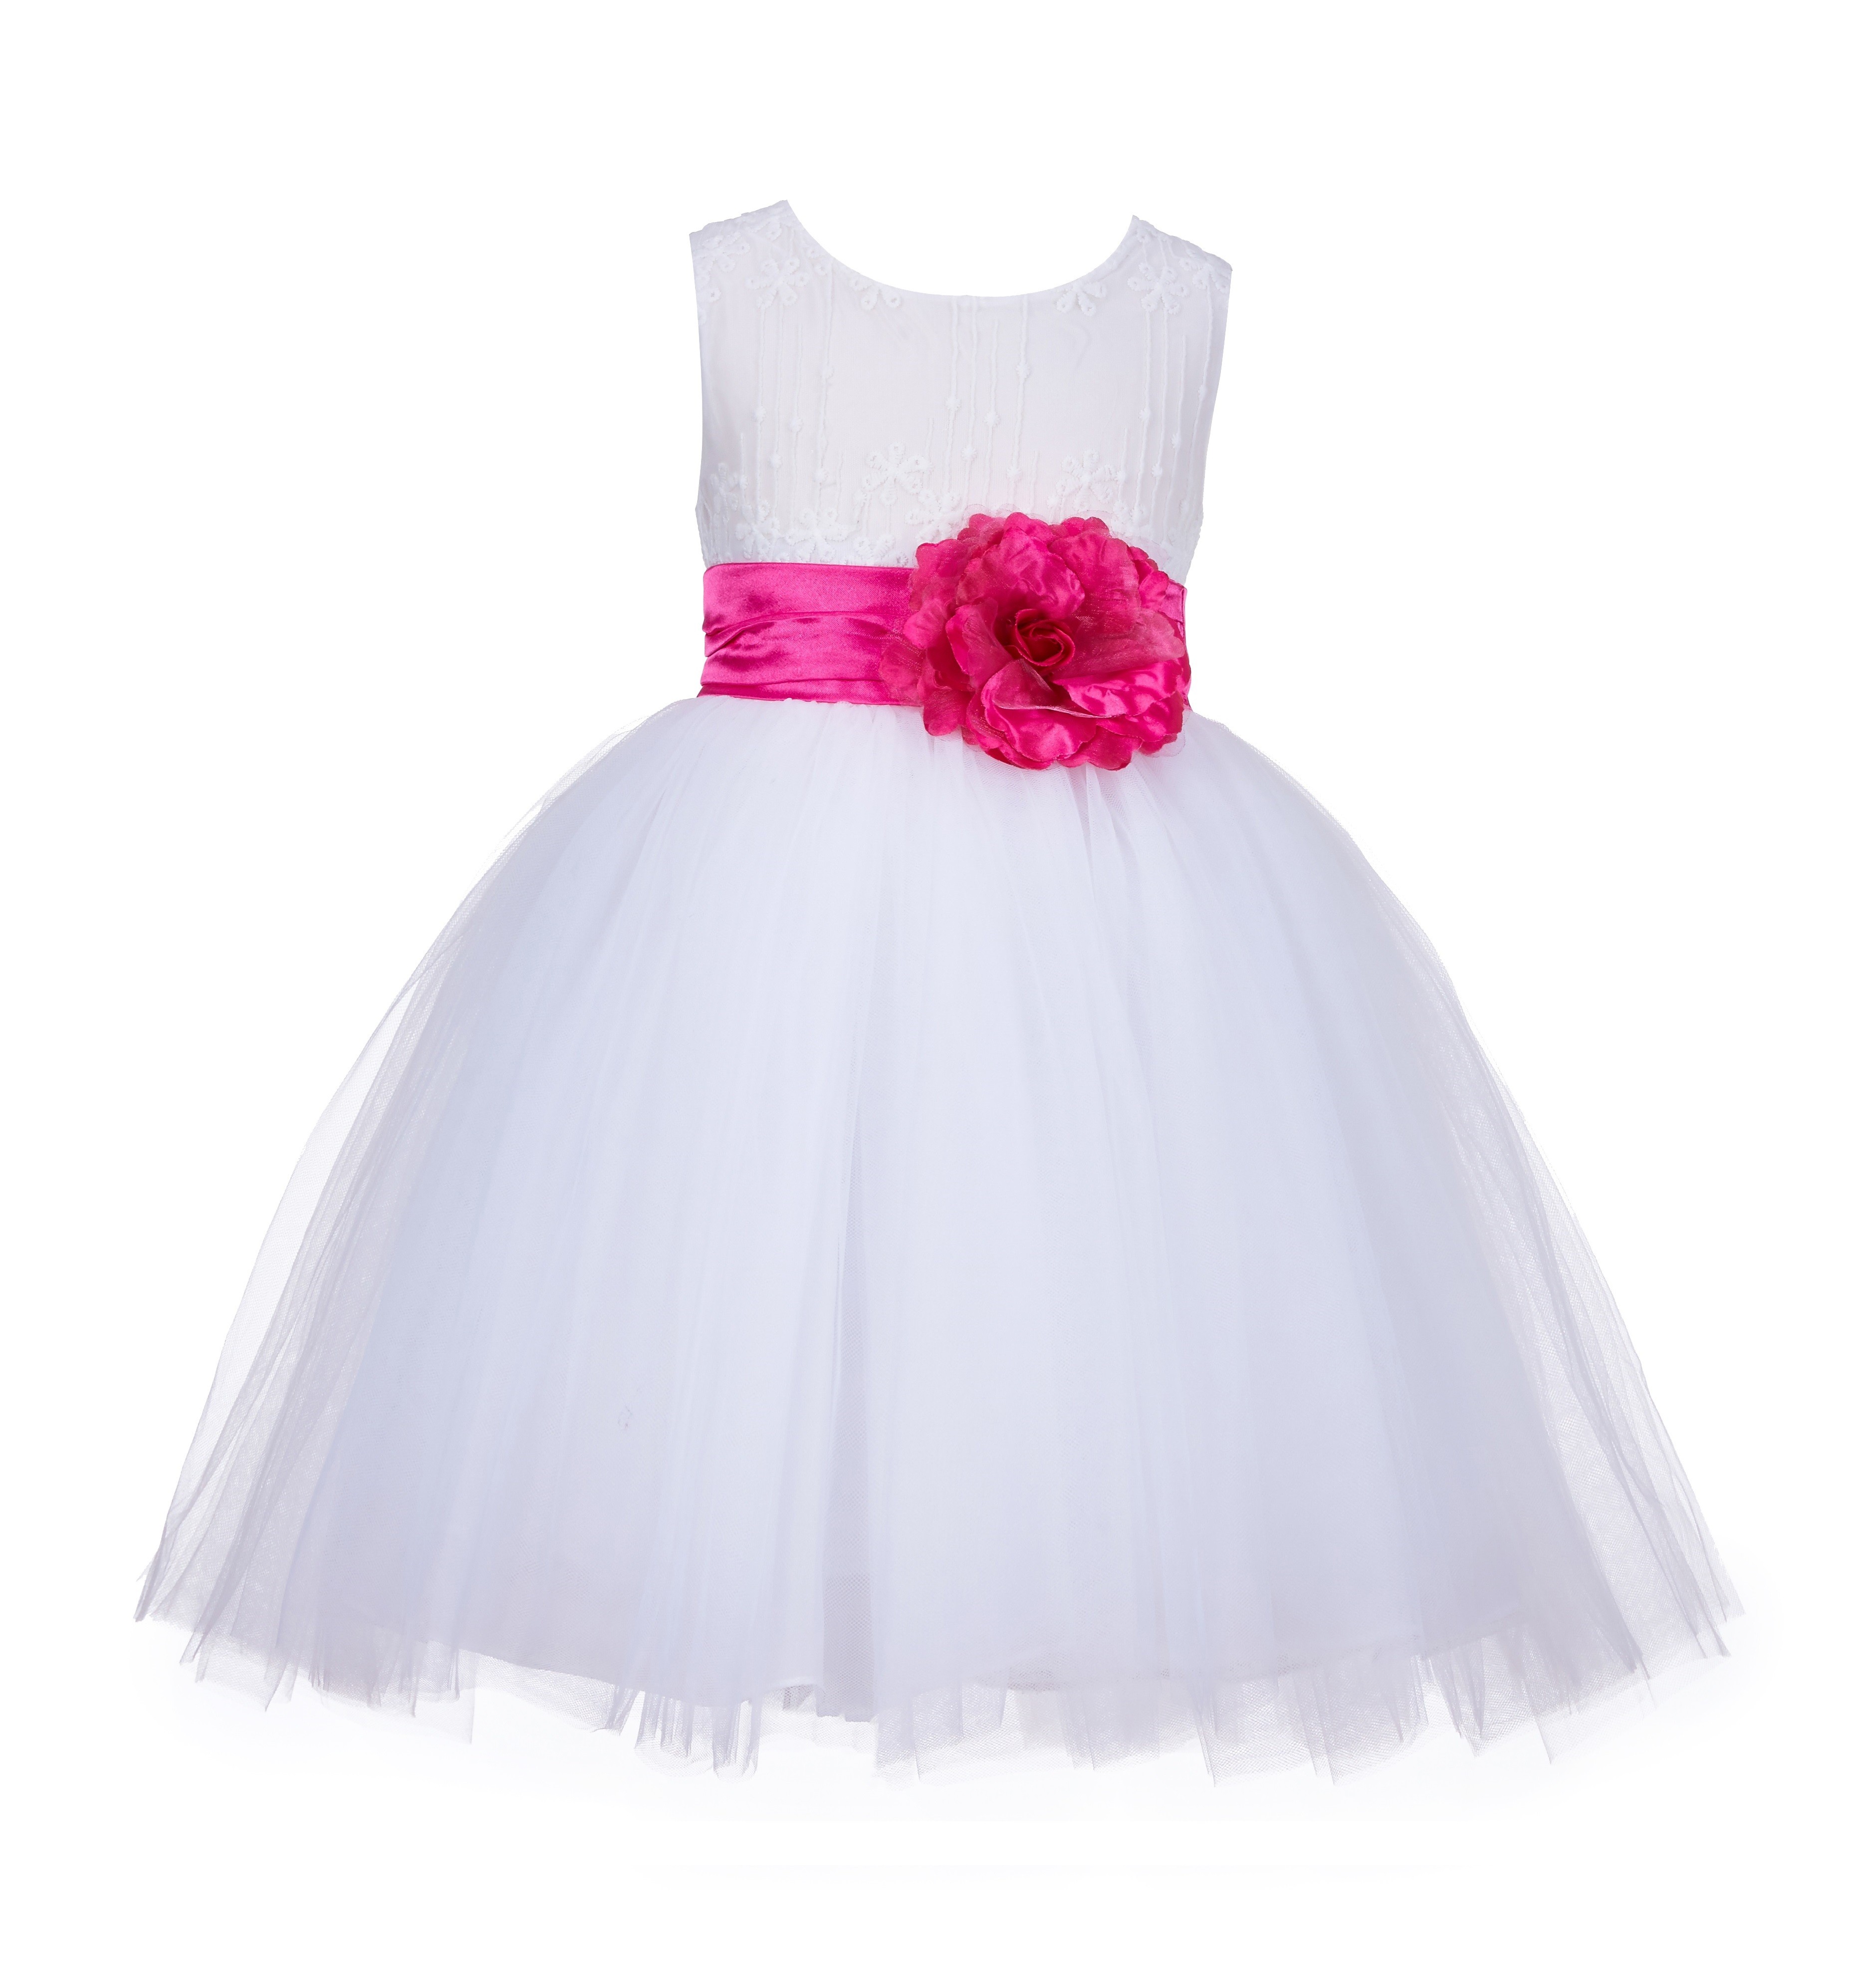 White/Fuchsia Lace Embroidery Tulle Flower Girl Dress Wedding 118